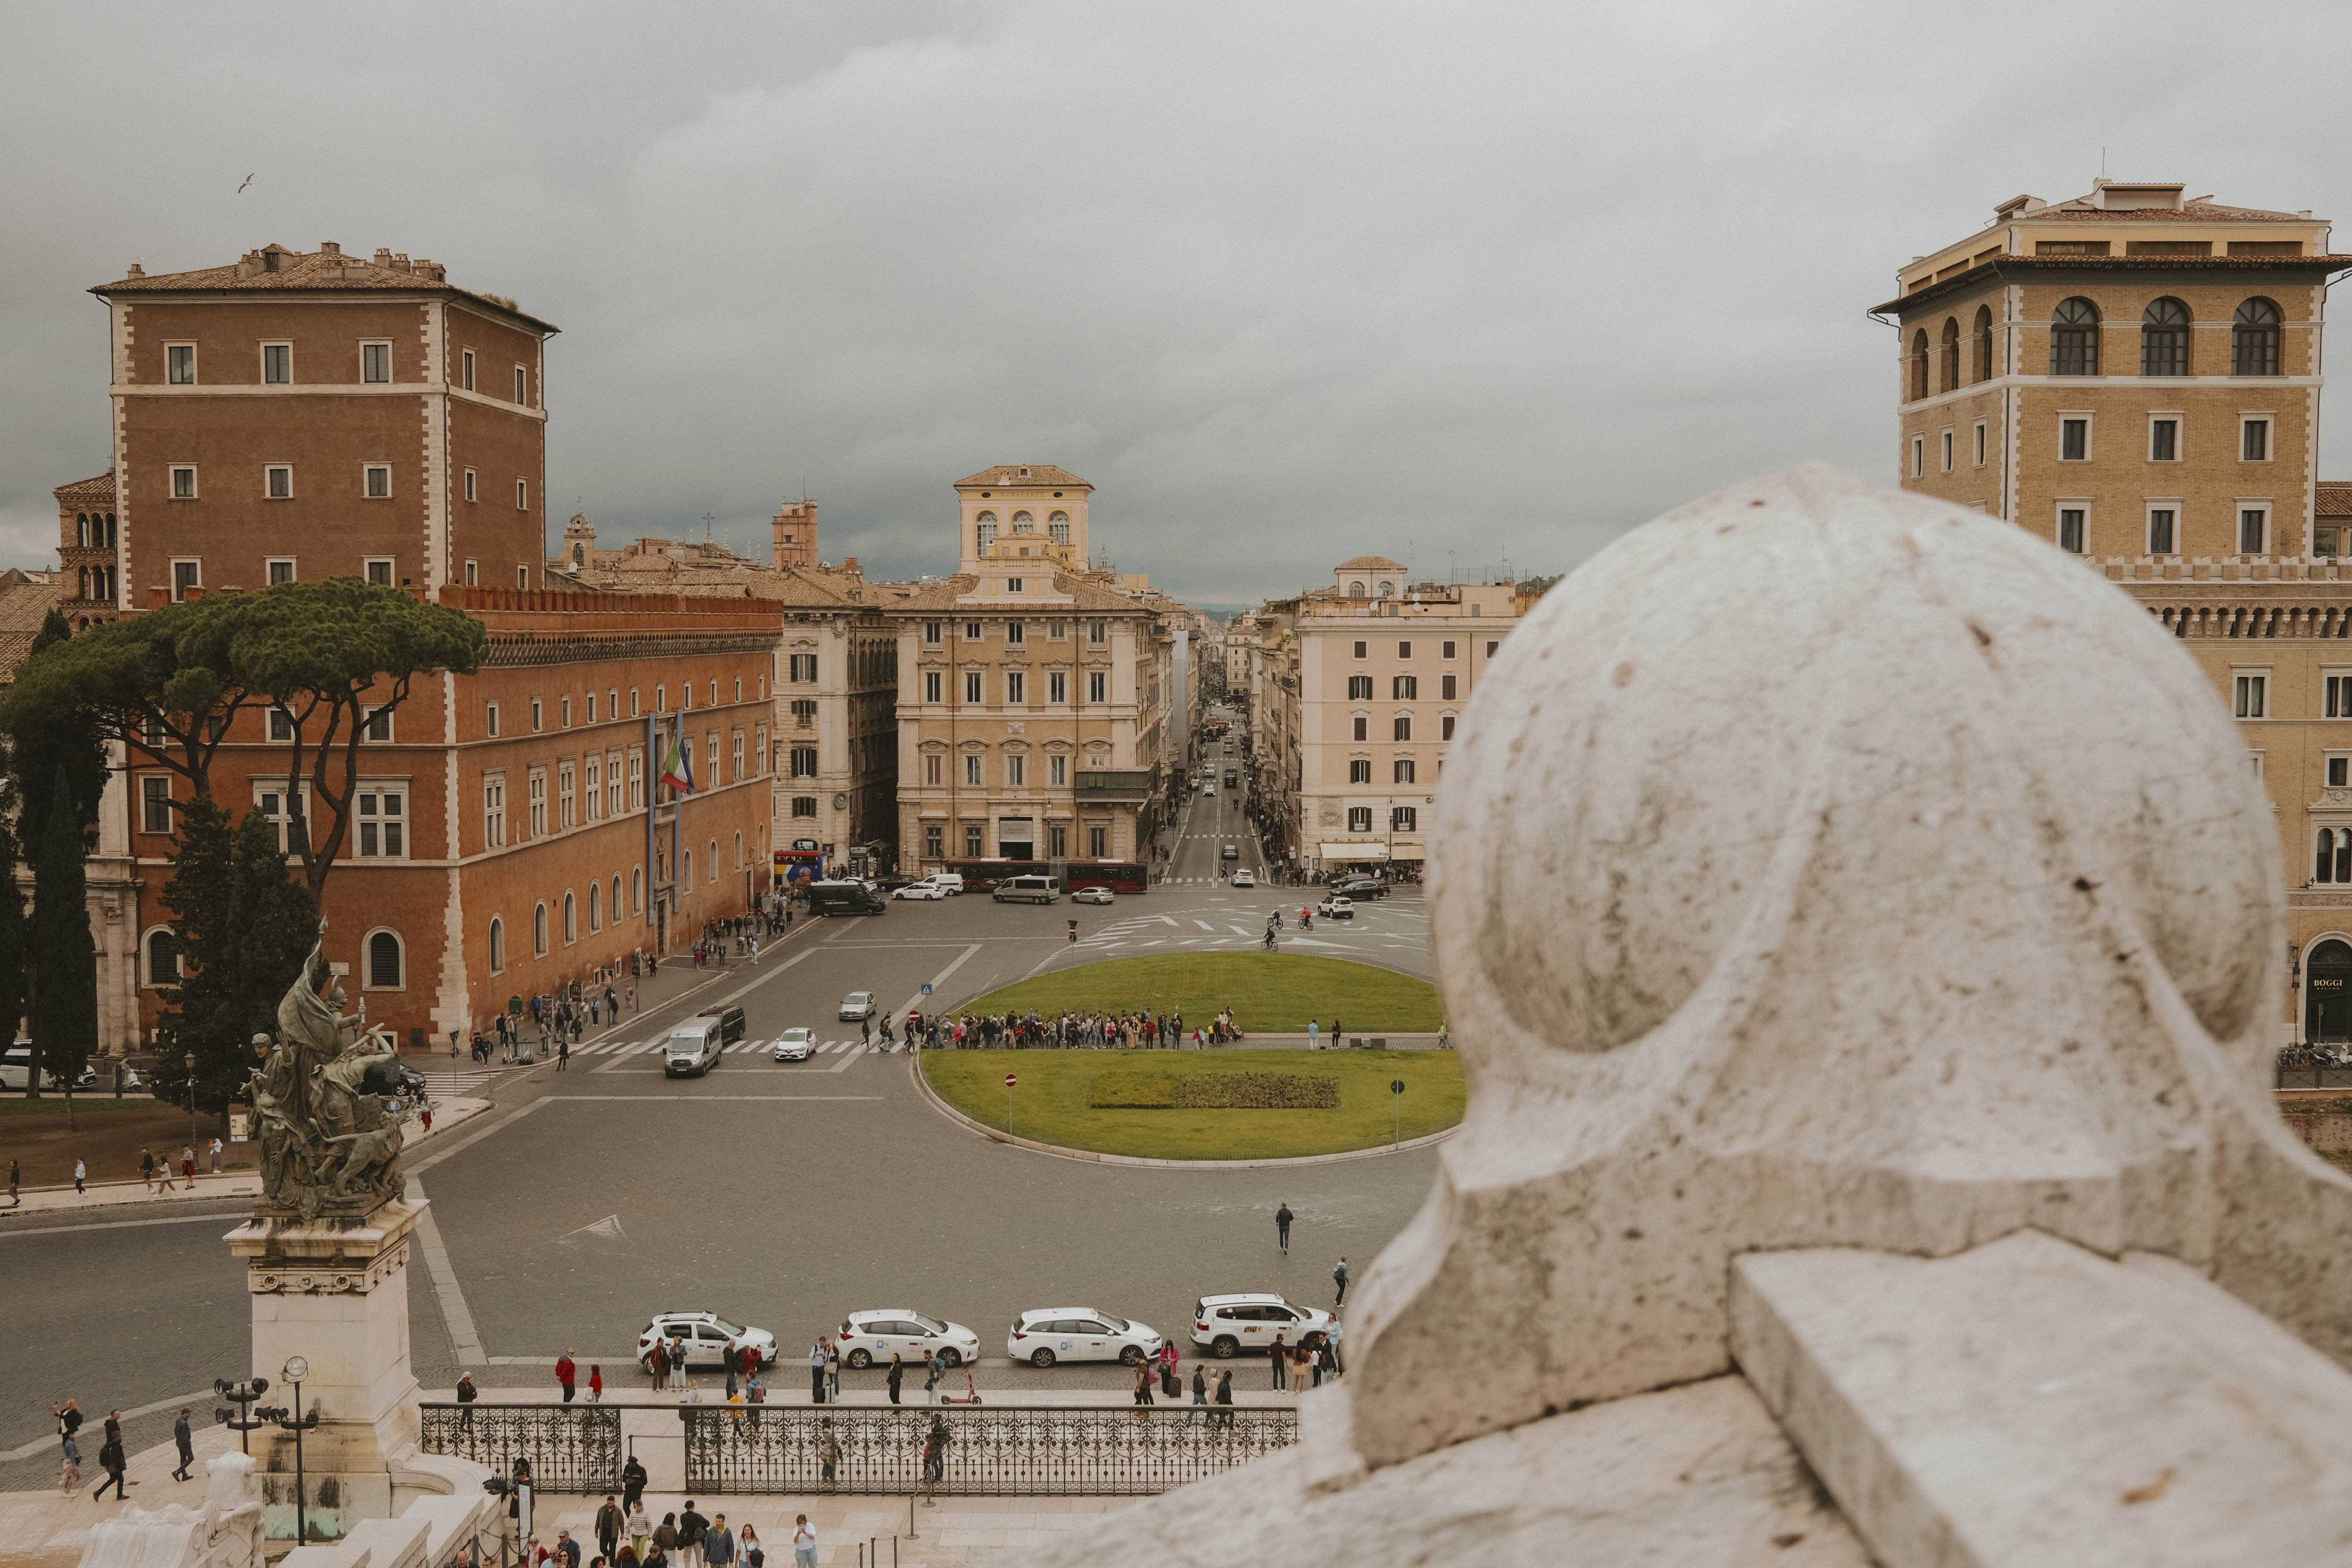 On the Victor Emmanuel II Monument, looking towards the city and a long, wide street.